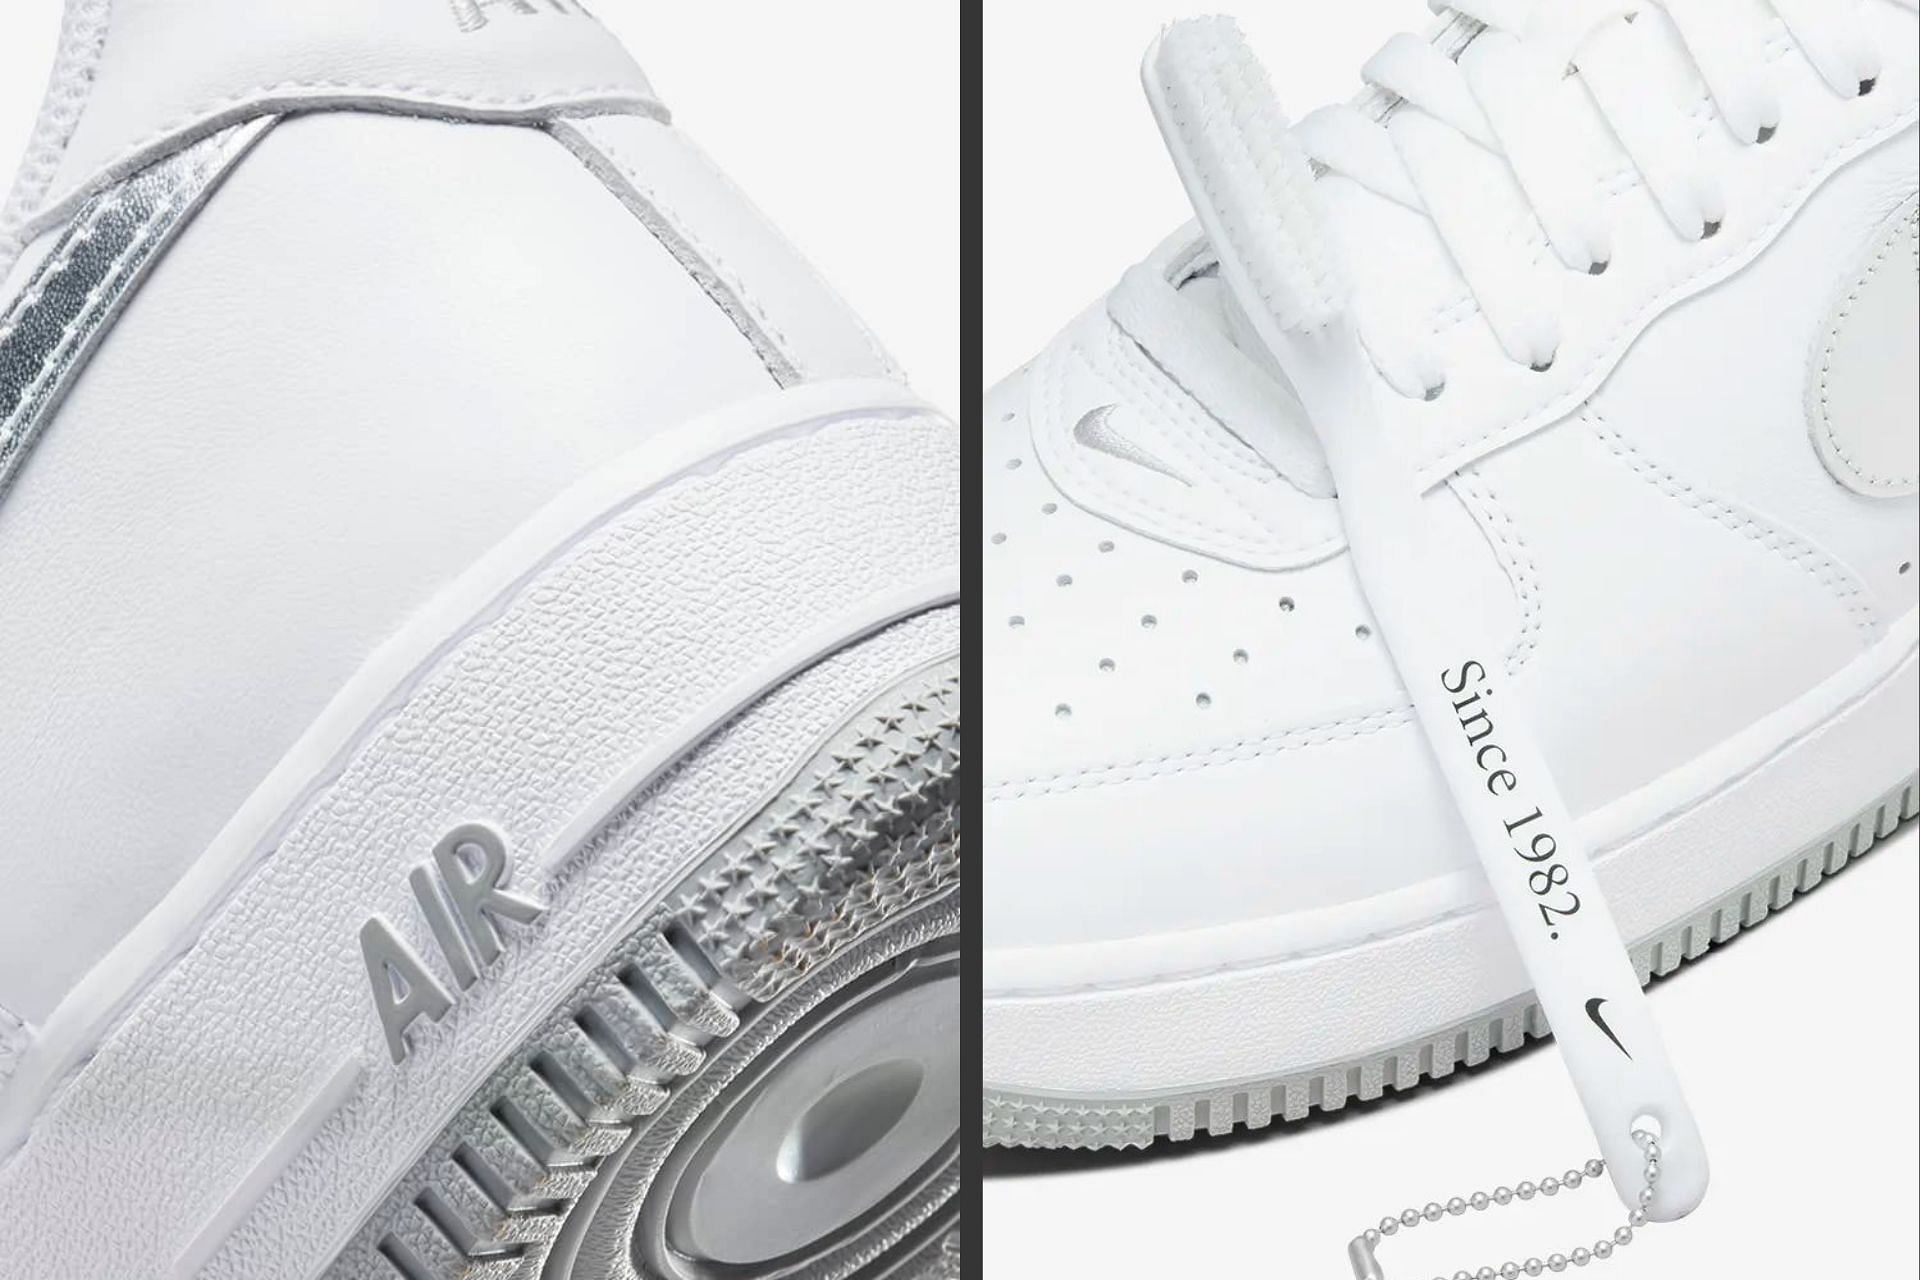 Take a closer look at the heels and the cleaning brush offered with the Nike Air Force 1 shoes (Image via Nike)